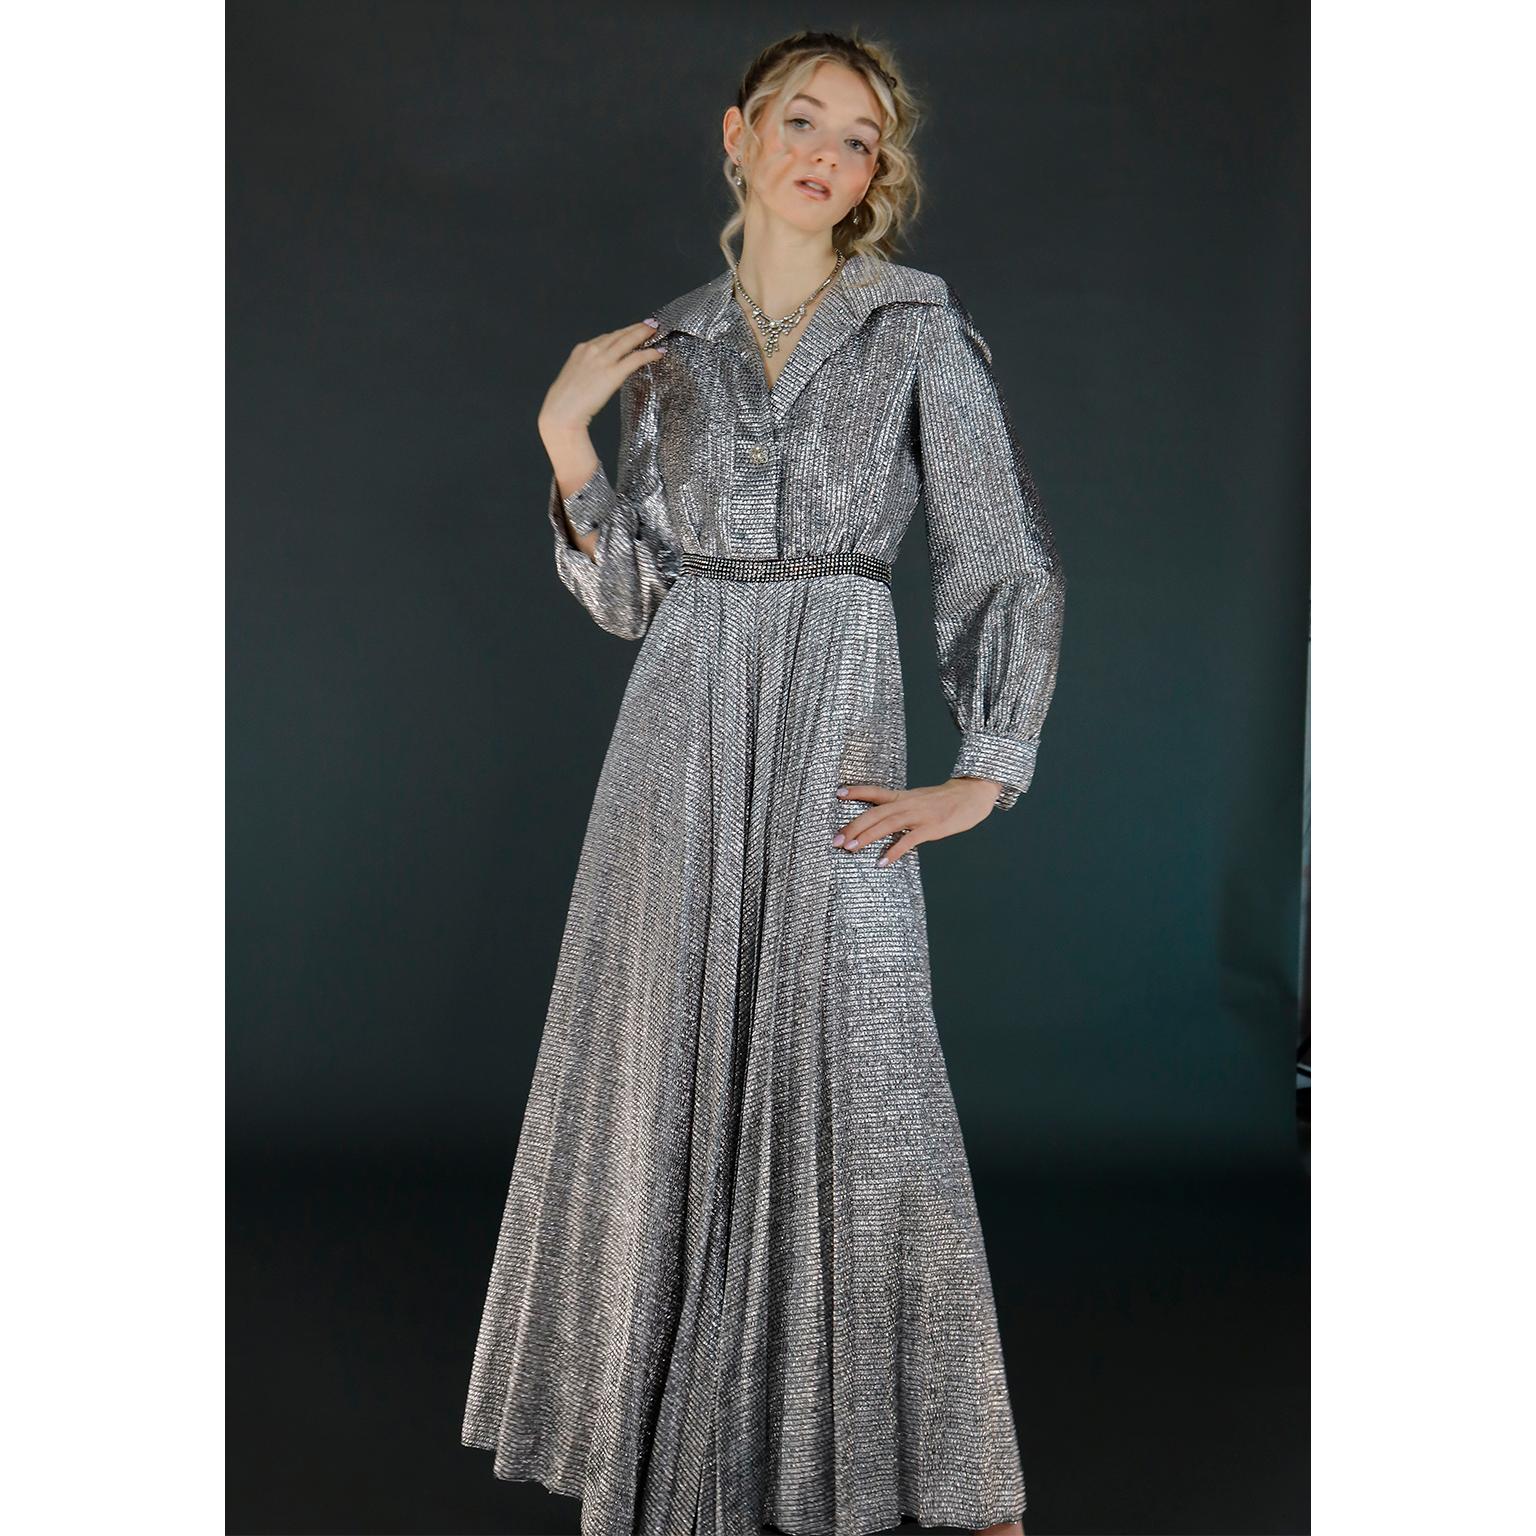 Vintage 1960s 1970s Silver Sparkle Palazzo Jumpsuit Evening Dress Alternative In Excellent Condition For Sale In Portland, OR